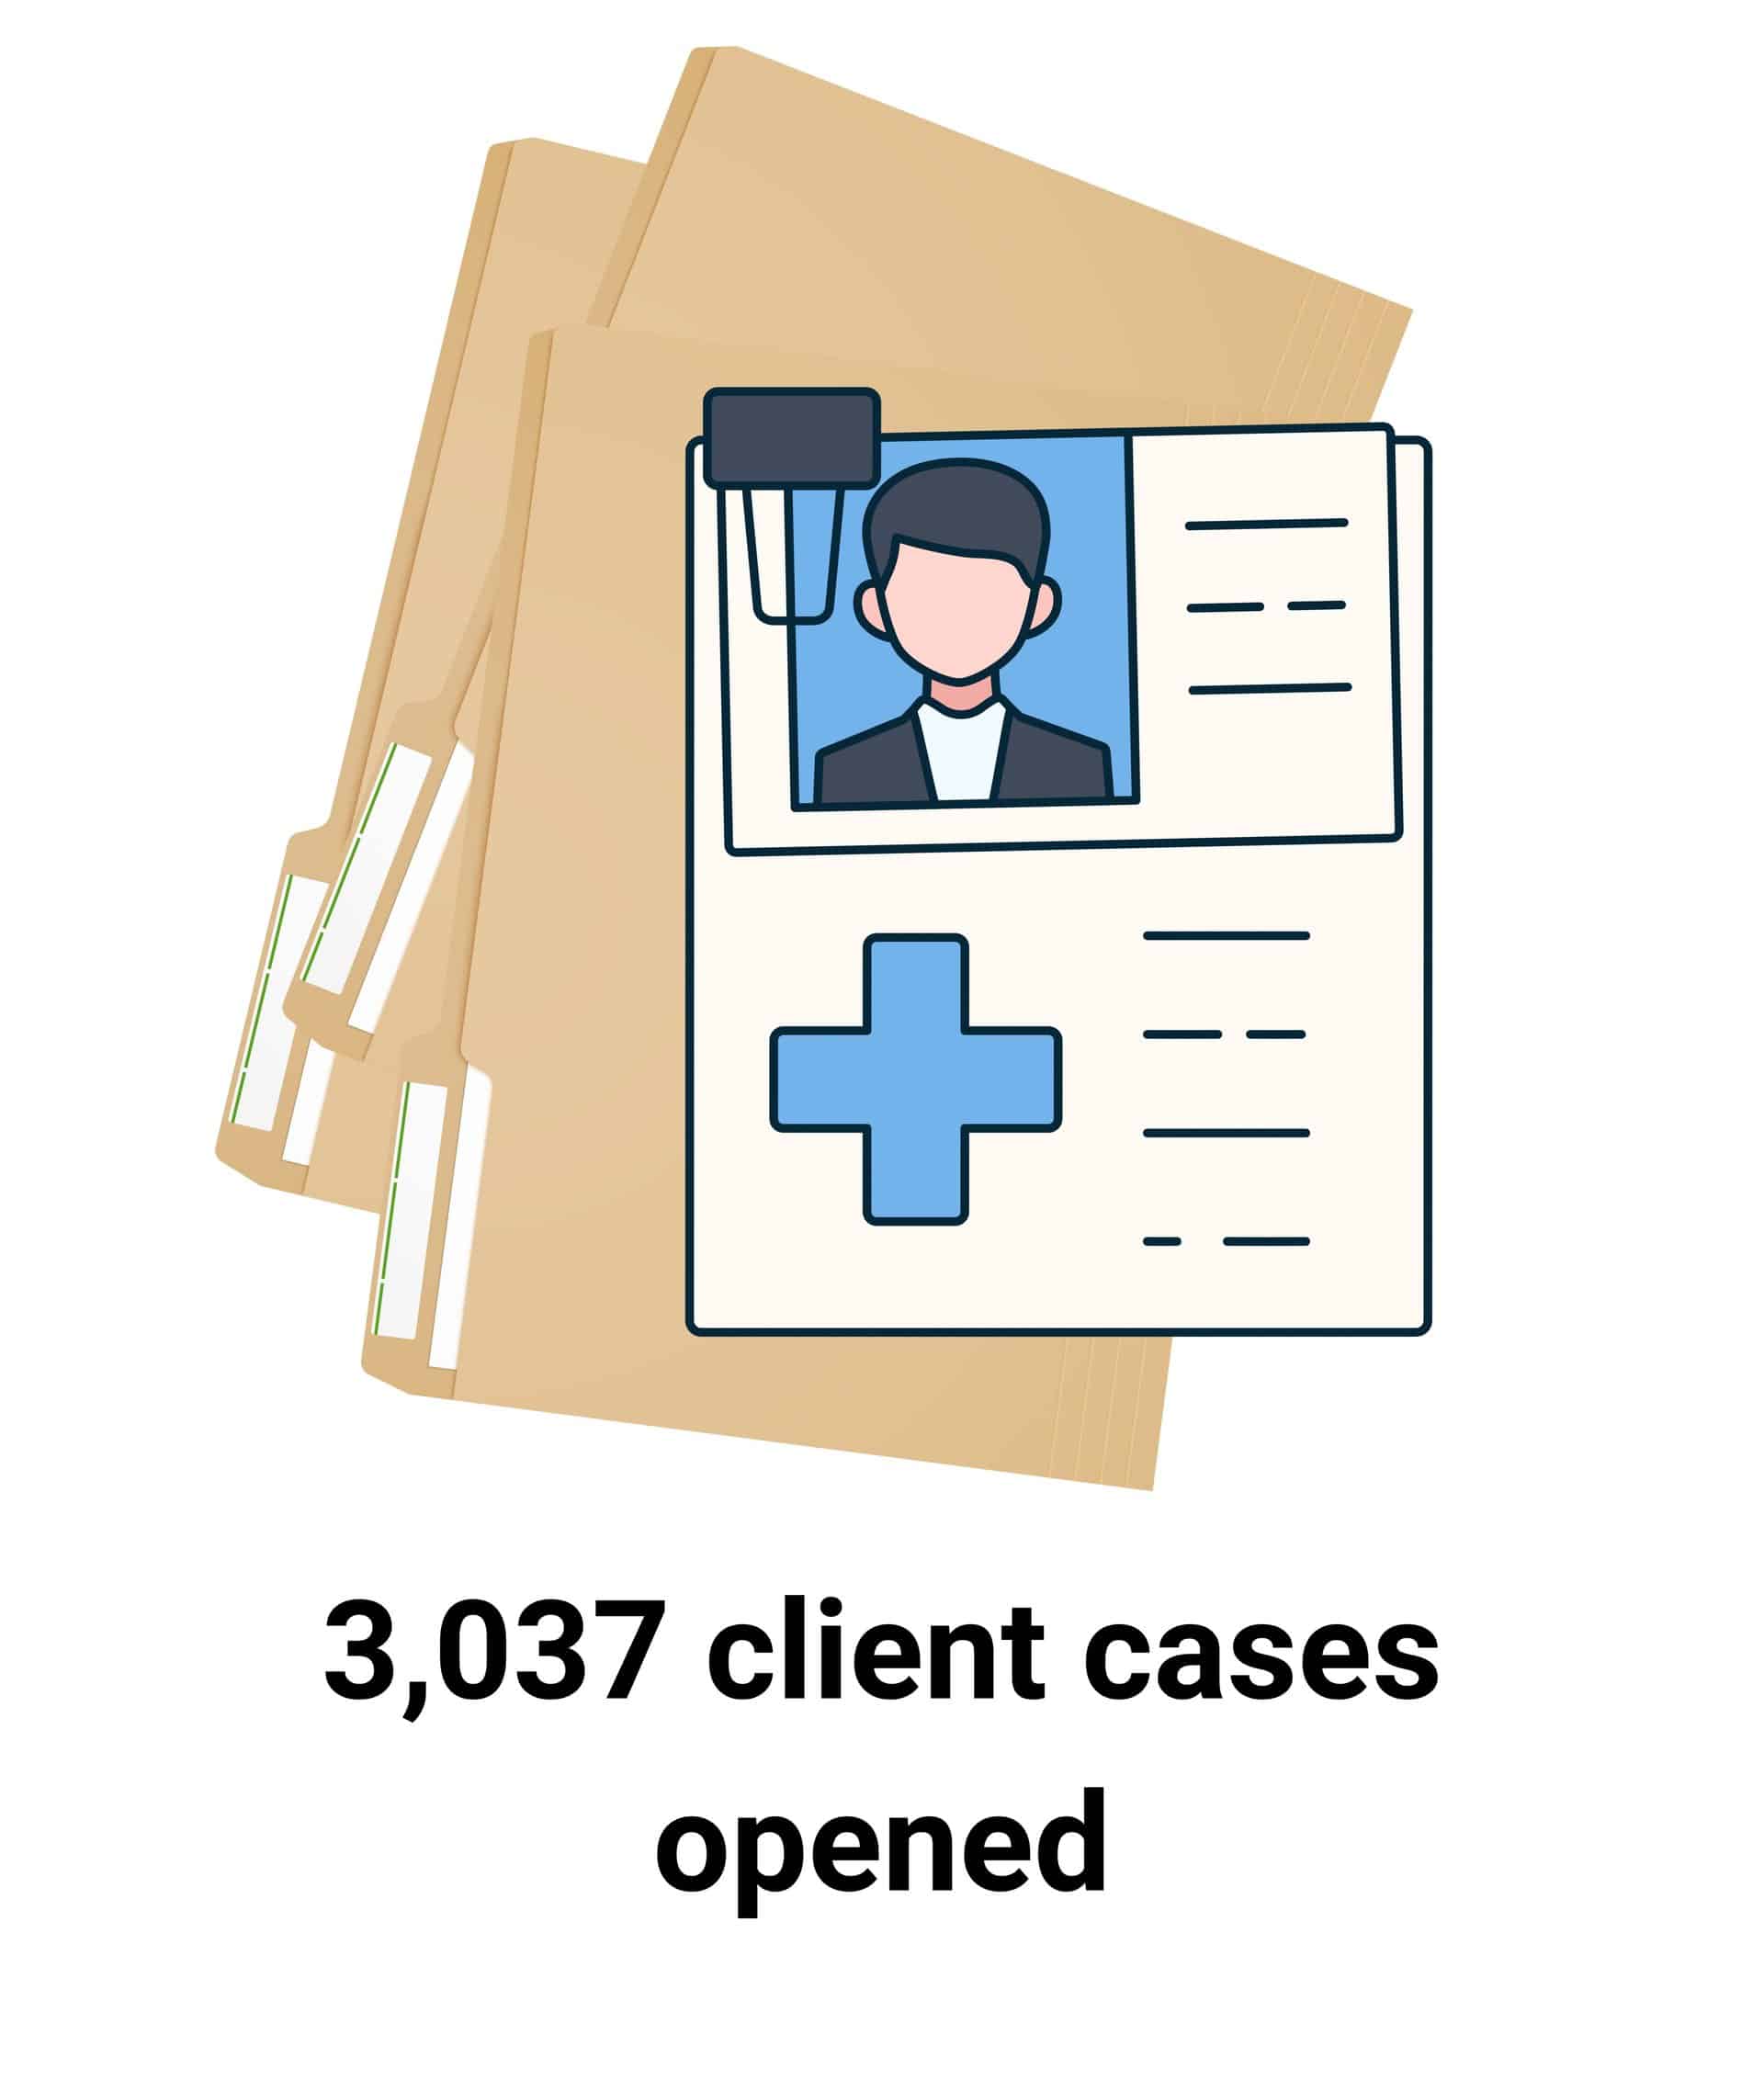 A stack of files with a person's photo and paperwork on top. 3,037 client cases opened.